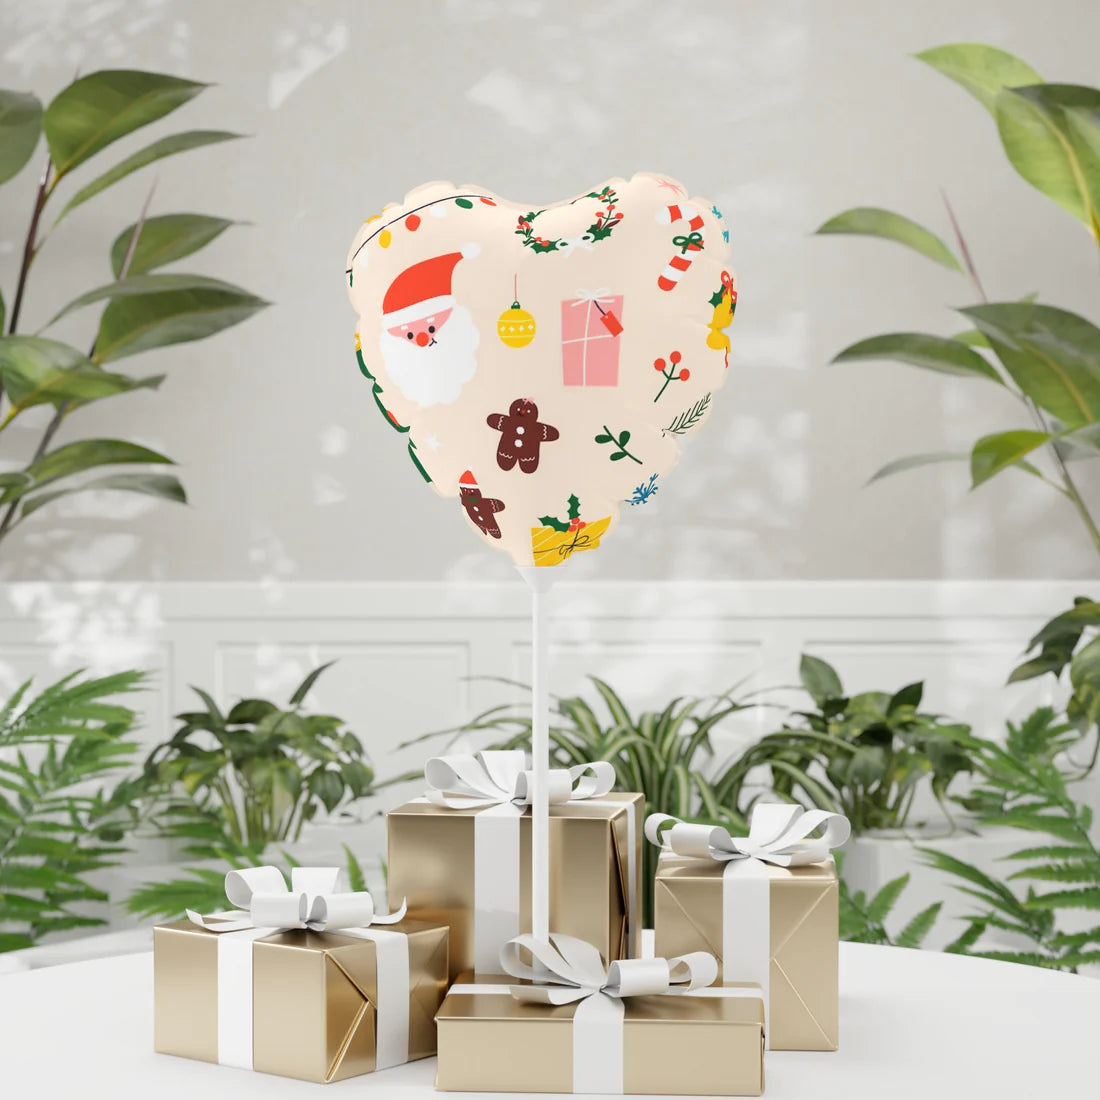 Christmas Balloon (Round and Heart-shaped), 11"